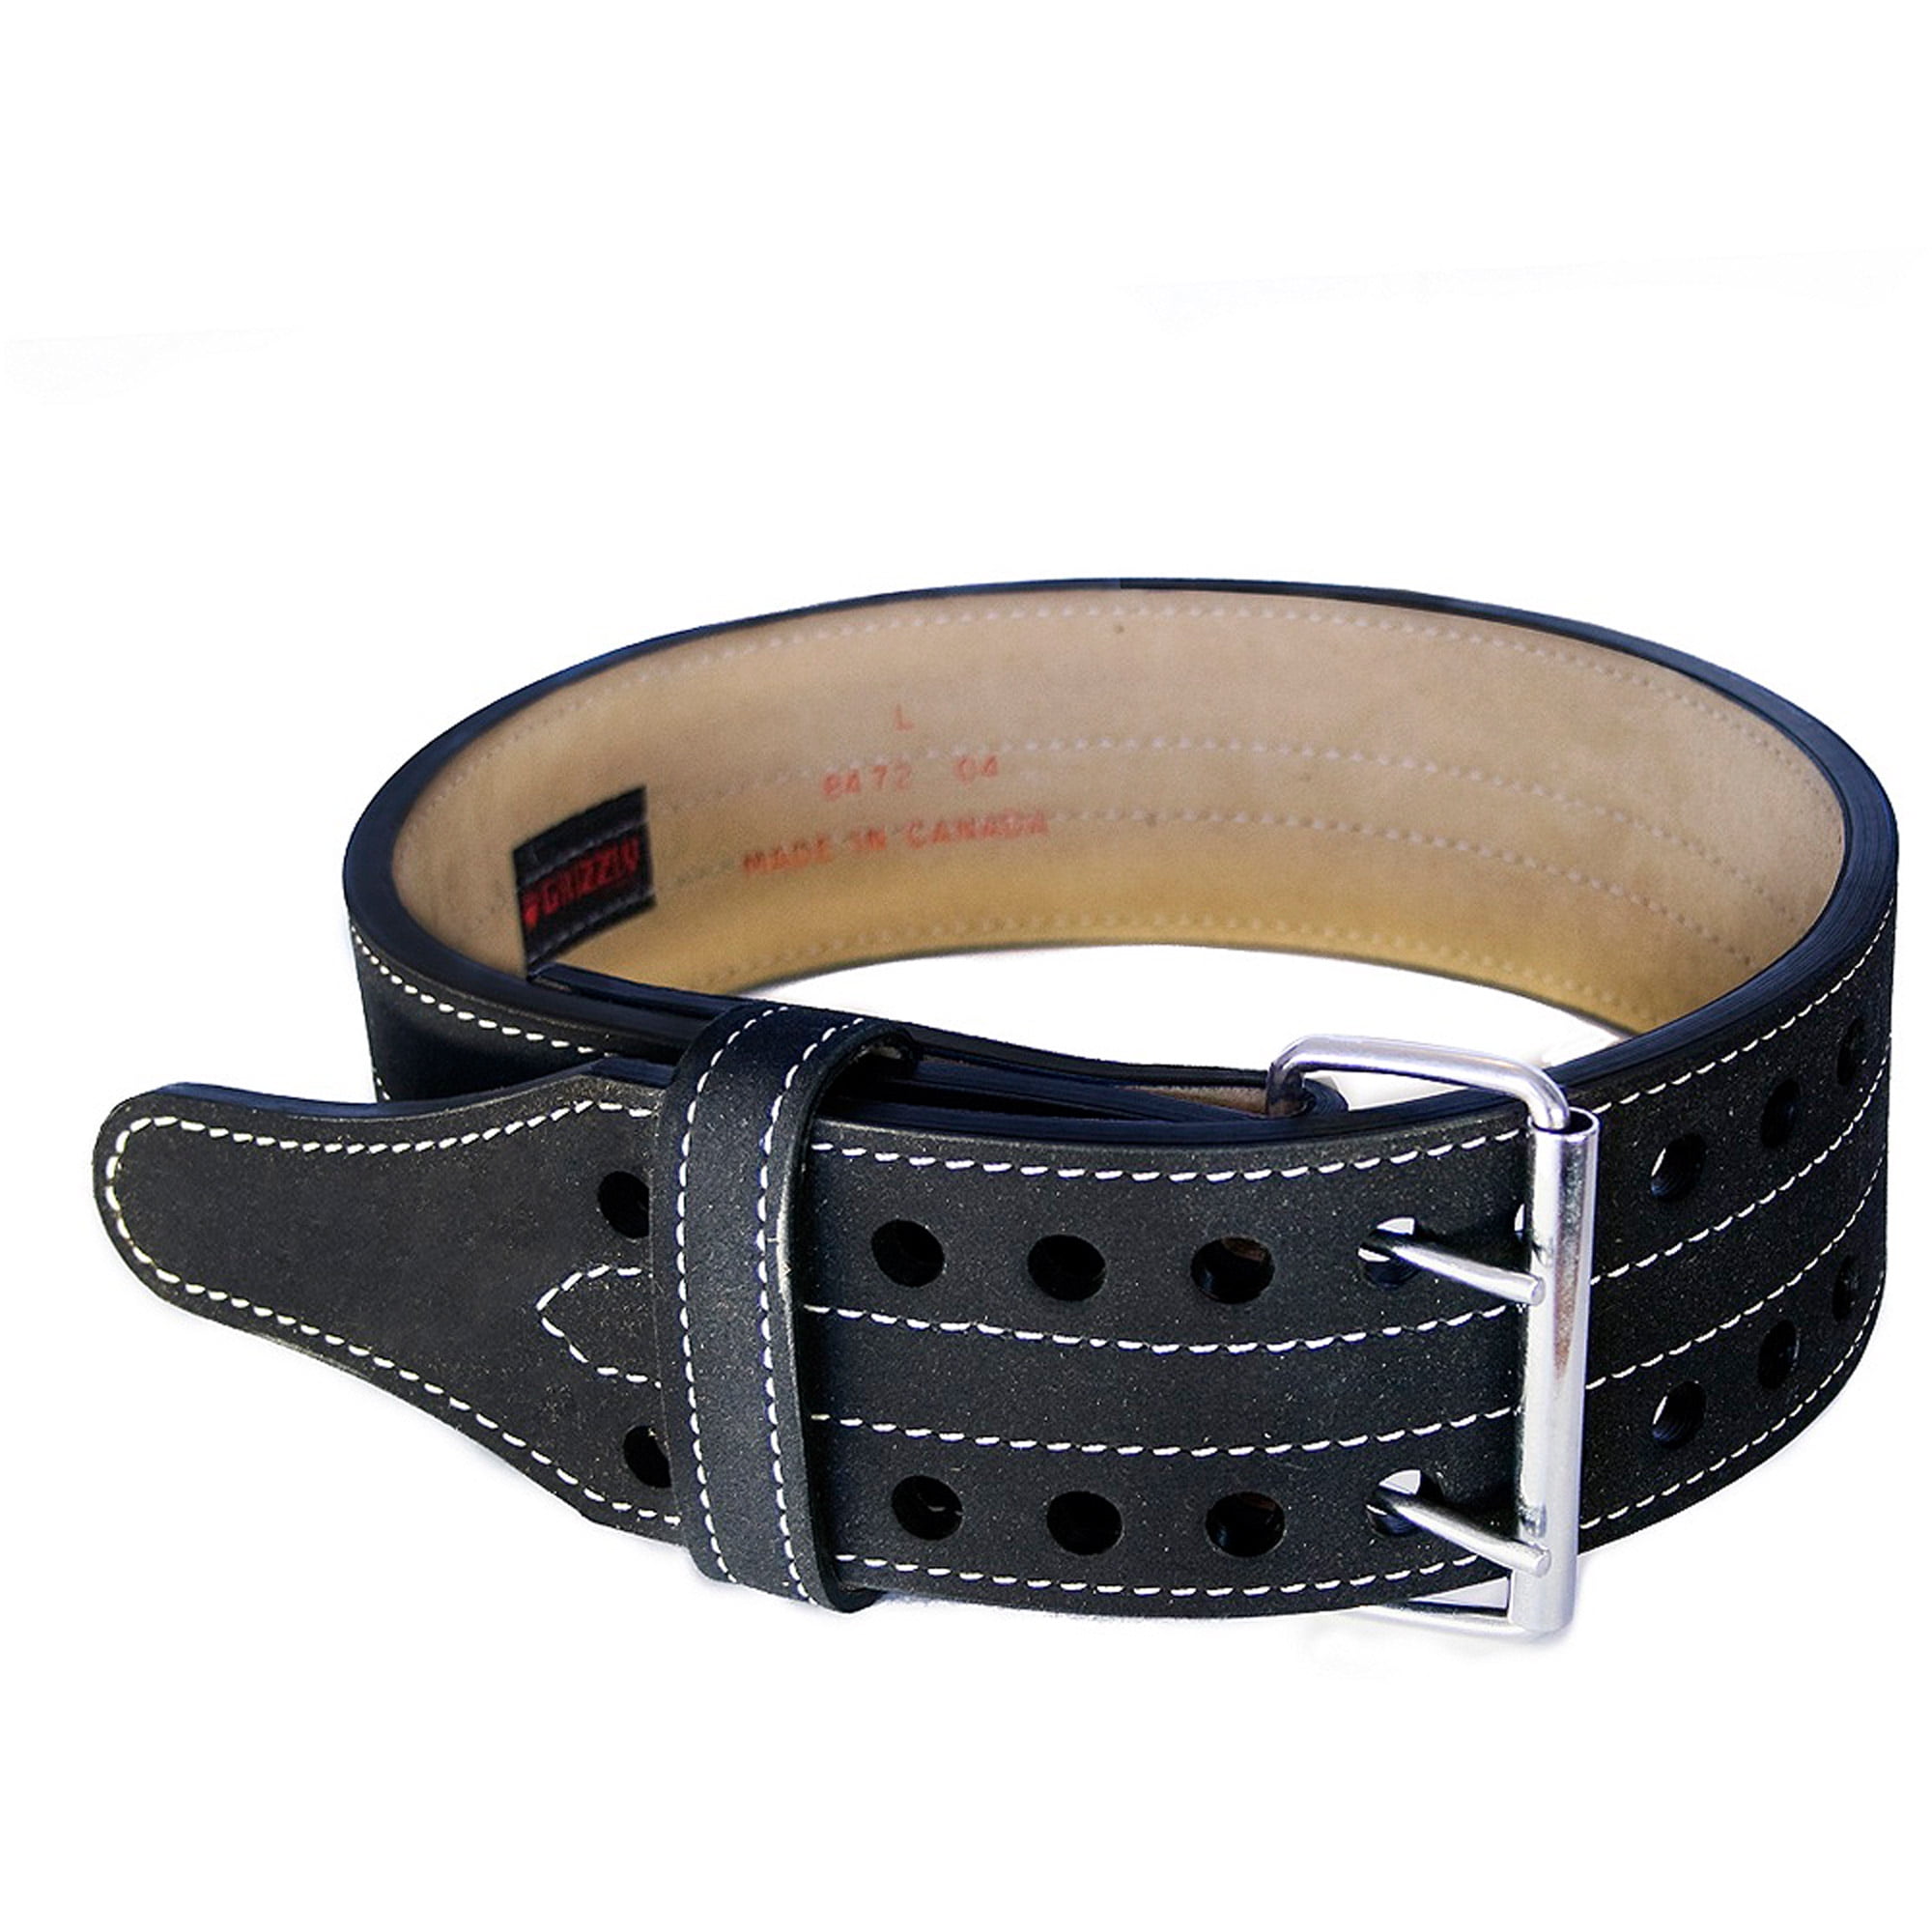 POWERLIFTING BELT SINGLE DOUBLE PRONG WEIGHTLIFTING GYM TRAINING WORKOUT LEATHER 